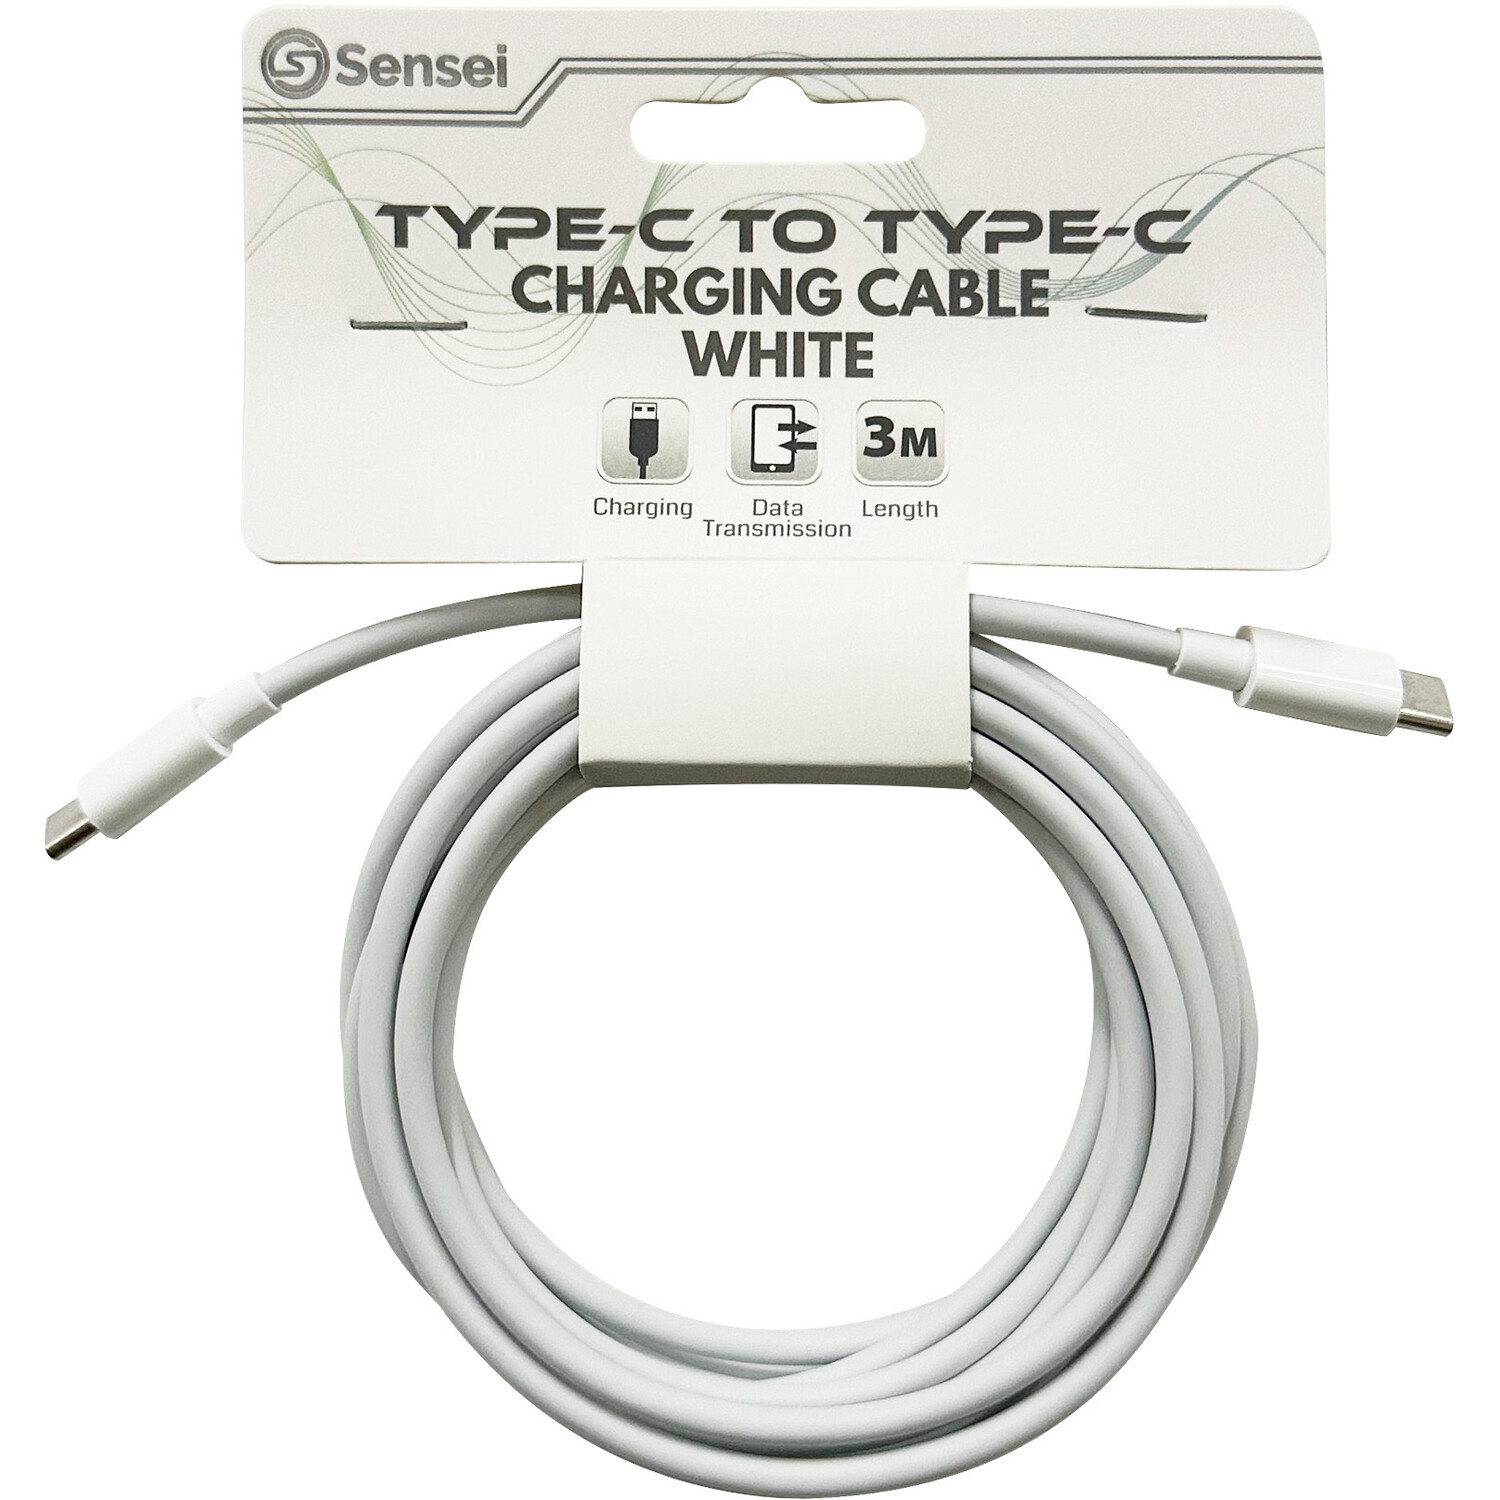 Type-C to Type-C Charging Cable - 3m Image